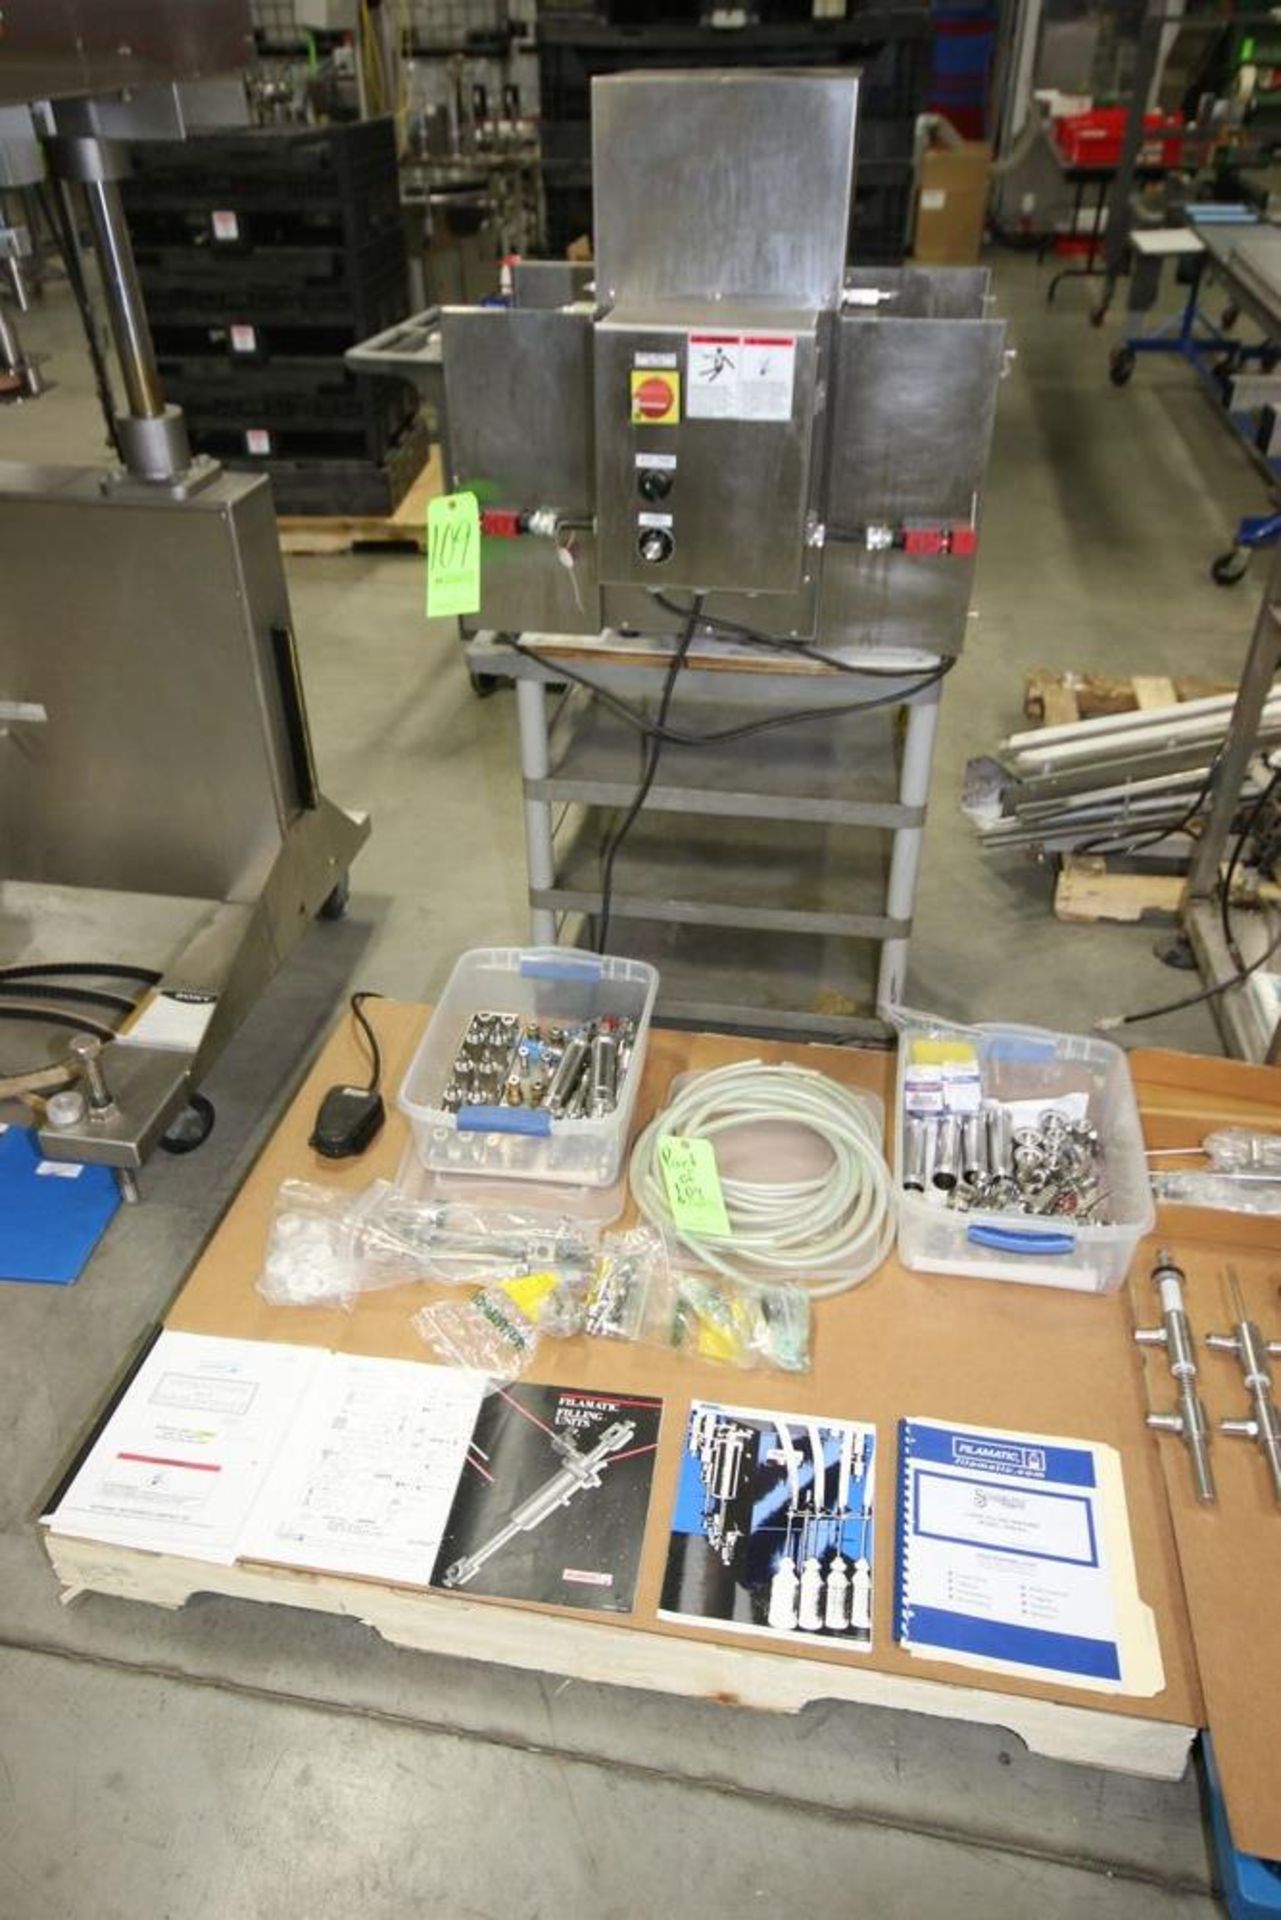 Filamatic Liquid Filling Machine, M/N DAB-8-4, S/N 021238, with Foot Pedal, with Spare Parts